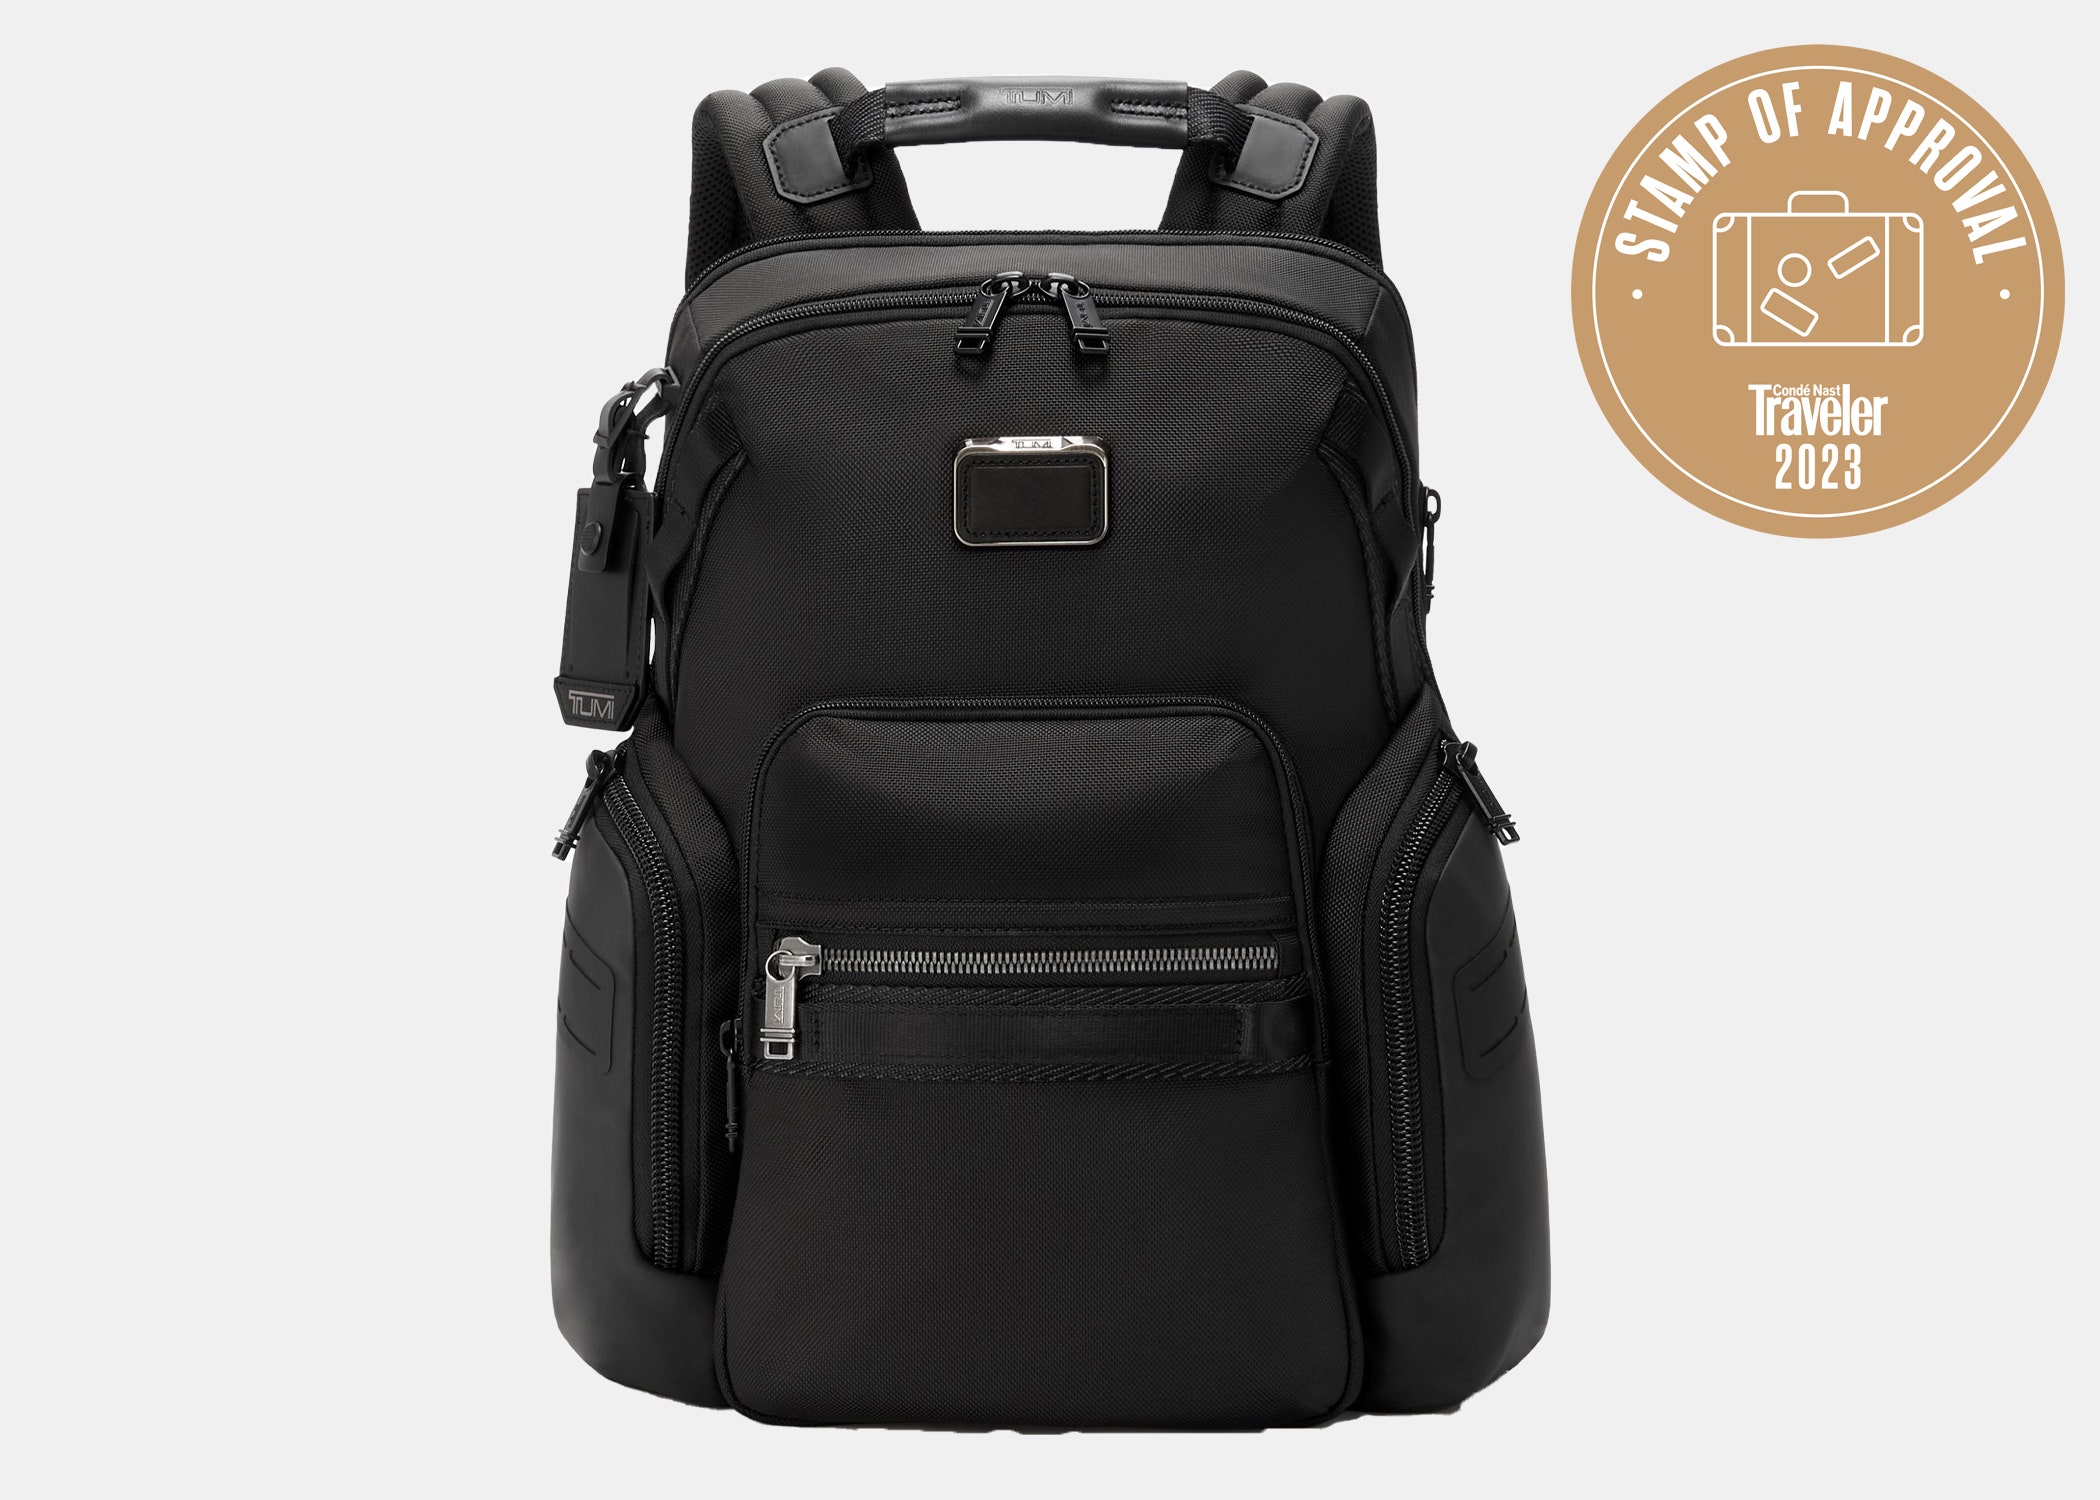 <p>With five colors and patterns to choose from, the customization is great for this Tumi backpack. The small, compact design hides the sheer capacity of the Navigator backpack—and it can be expanded for more space. Global director of audience development <a href="https://www.cntraveler.com/contributor/lara-kramer?mbid=synd_msn_rss&utm_source=msn&utm_medium=syndication">Lara Kramer</a> says she can easily fit a weekend's worth of clothes and <a href="https://www.cntraveler.com/story/reusable-bottles-mini-toiletries?mbid=synd_msn_rss&utm_source=msn&utm_medium=syndication">toiletries</a> inside (and an extra pair of flats or sandals in the summer). “Tumi’s backpacks are the perfect combination of functional and comfort. The shoulder straps are well-padded and easily adjustable, and the bag also features a padded mesh back panel for additional support. For easy lifting, there is also a leather top carry handle that adds to its versatility,” says Kramer. Plus, it's made from recycled ballistic nylon, so you can feel good about your purchase.</p> <p><strong>Pros:</strong> Many pockets (both inside and outside), padded mesh back panel, recycled material<br> <strong>Cons:</strong> Hefty price tag</p> $525, Amazon. <a href="https://www.amazon.com/TUMI-Mens-Navigation-Backpack-Black/dp/B09N8XX73V/ref=asc_df_B09N8XX73V/?">Get it now!</a><p>Sign up to receive the latest news, expert tips, and inspiration on all things travel</p><a href="https://www.cntraveler.com/newsletter/the-daily?sourceCode=msnsend">Inspire Me</a>